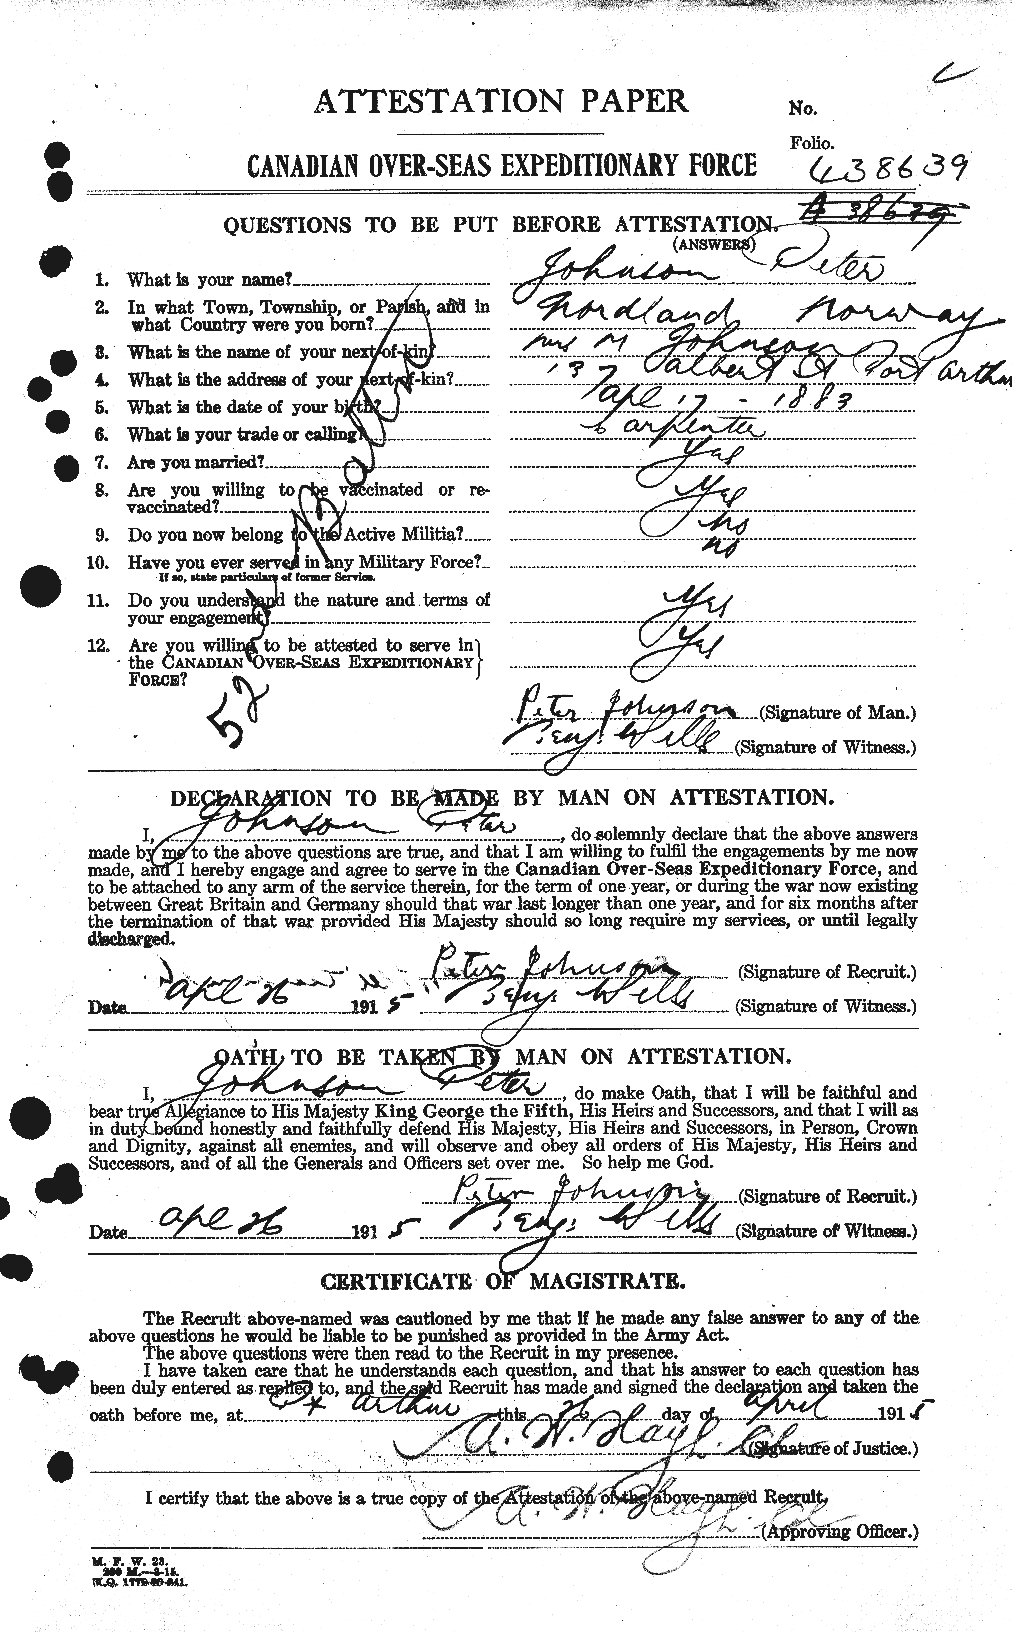 Personnel Records of the First World War - CEF 417283a